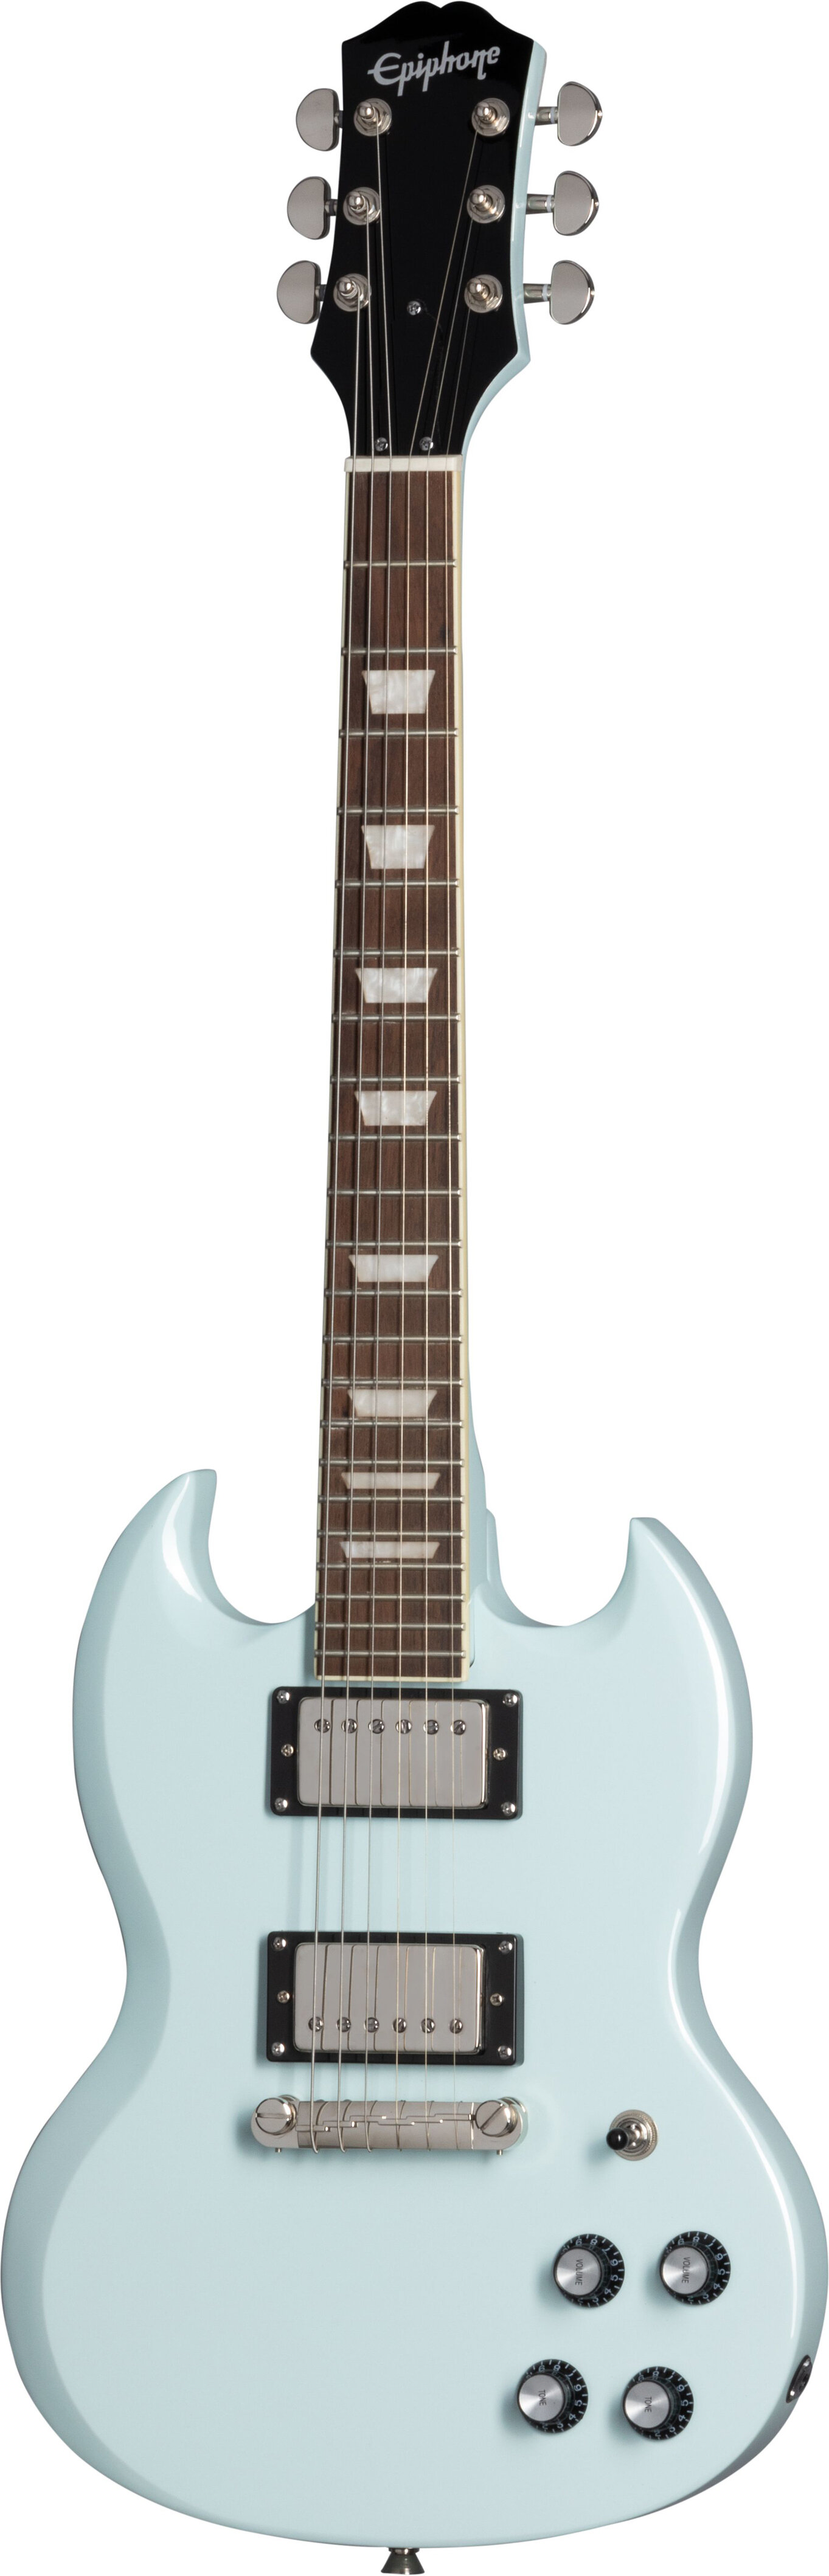 Epiphone ES1PPSGFBNH1